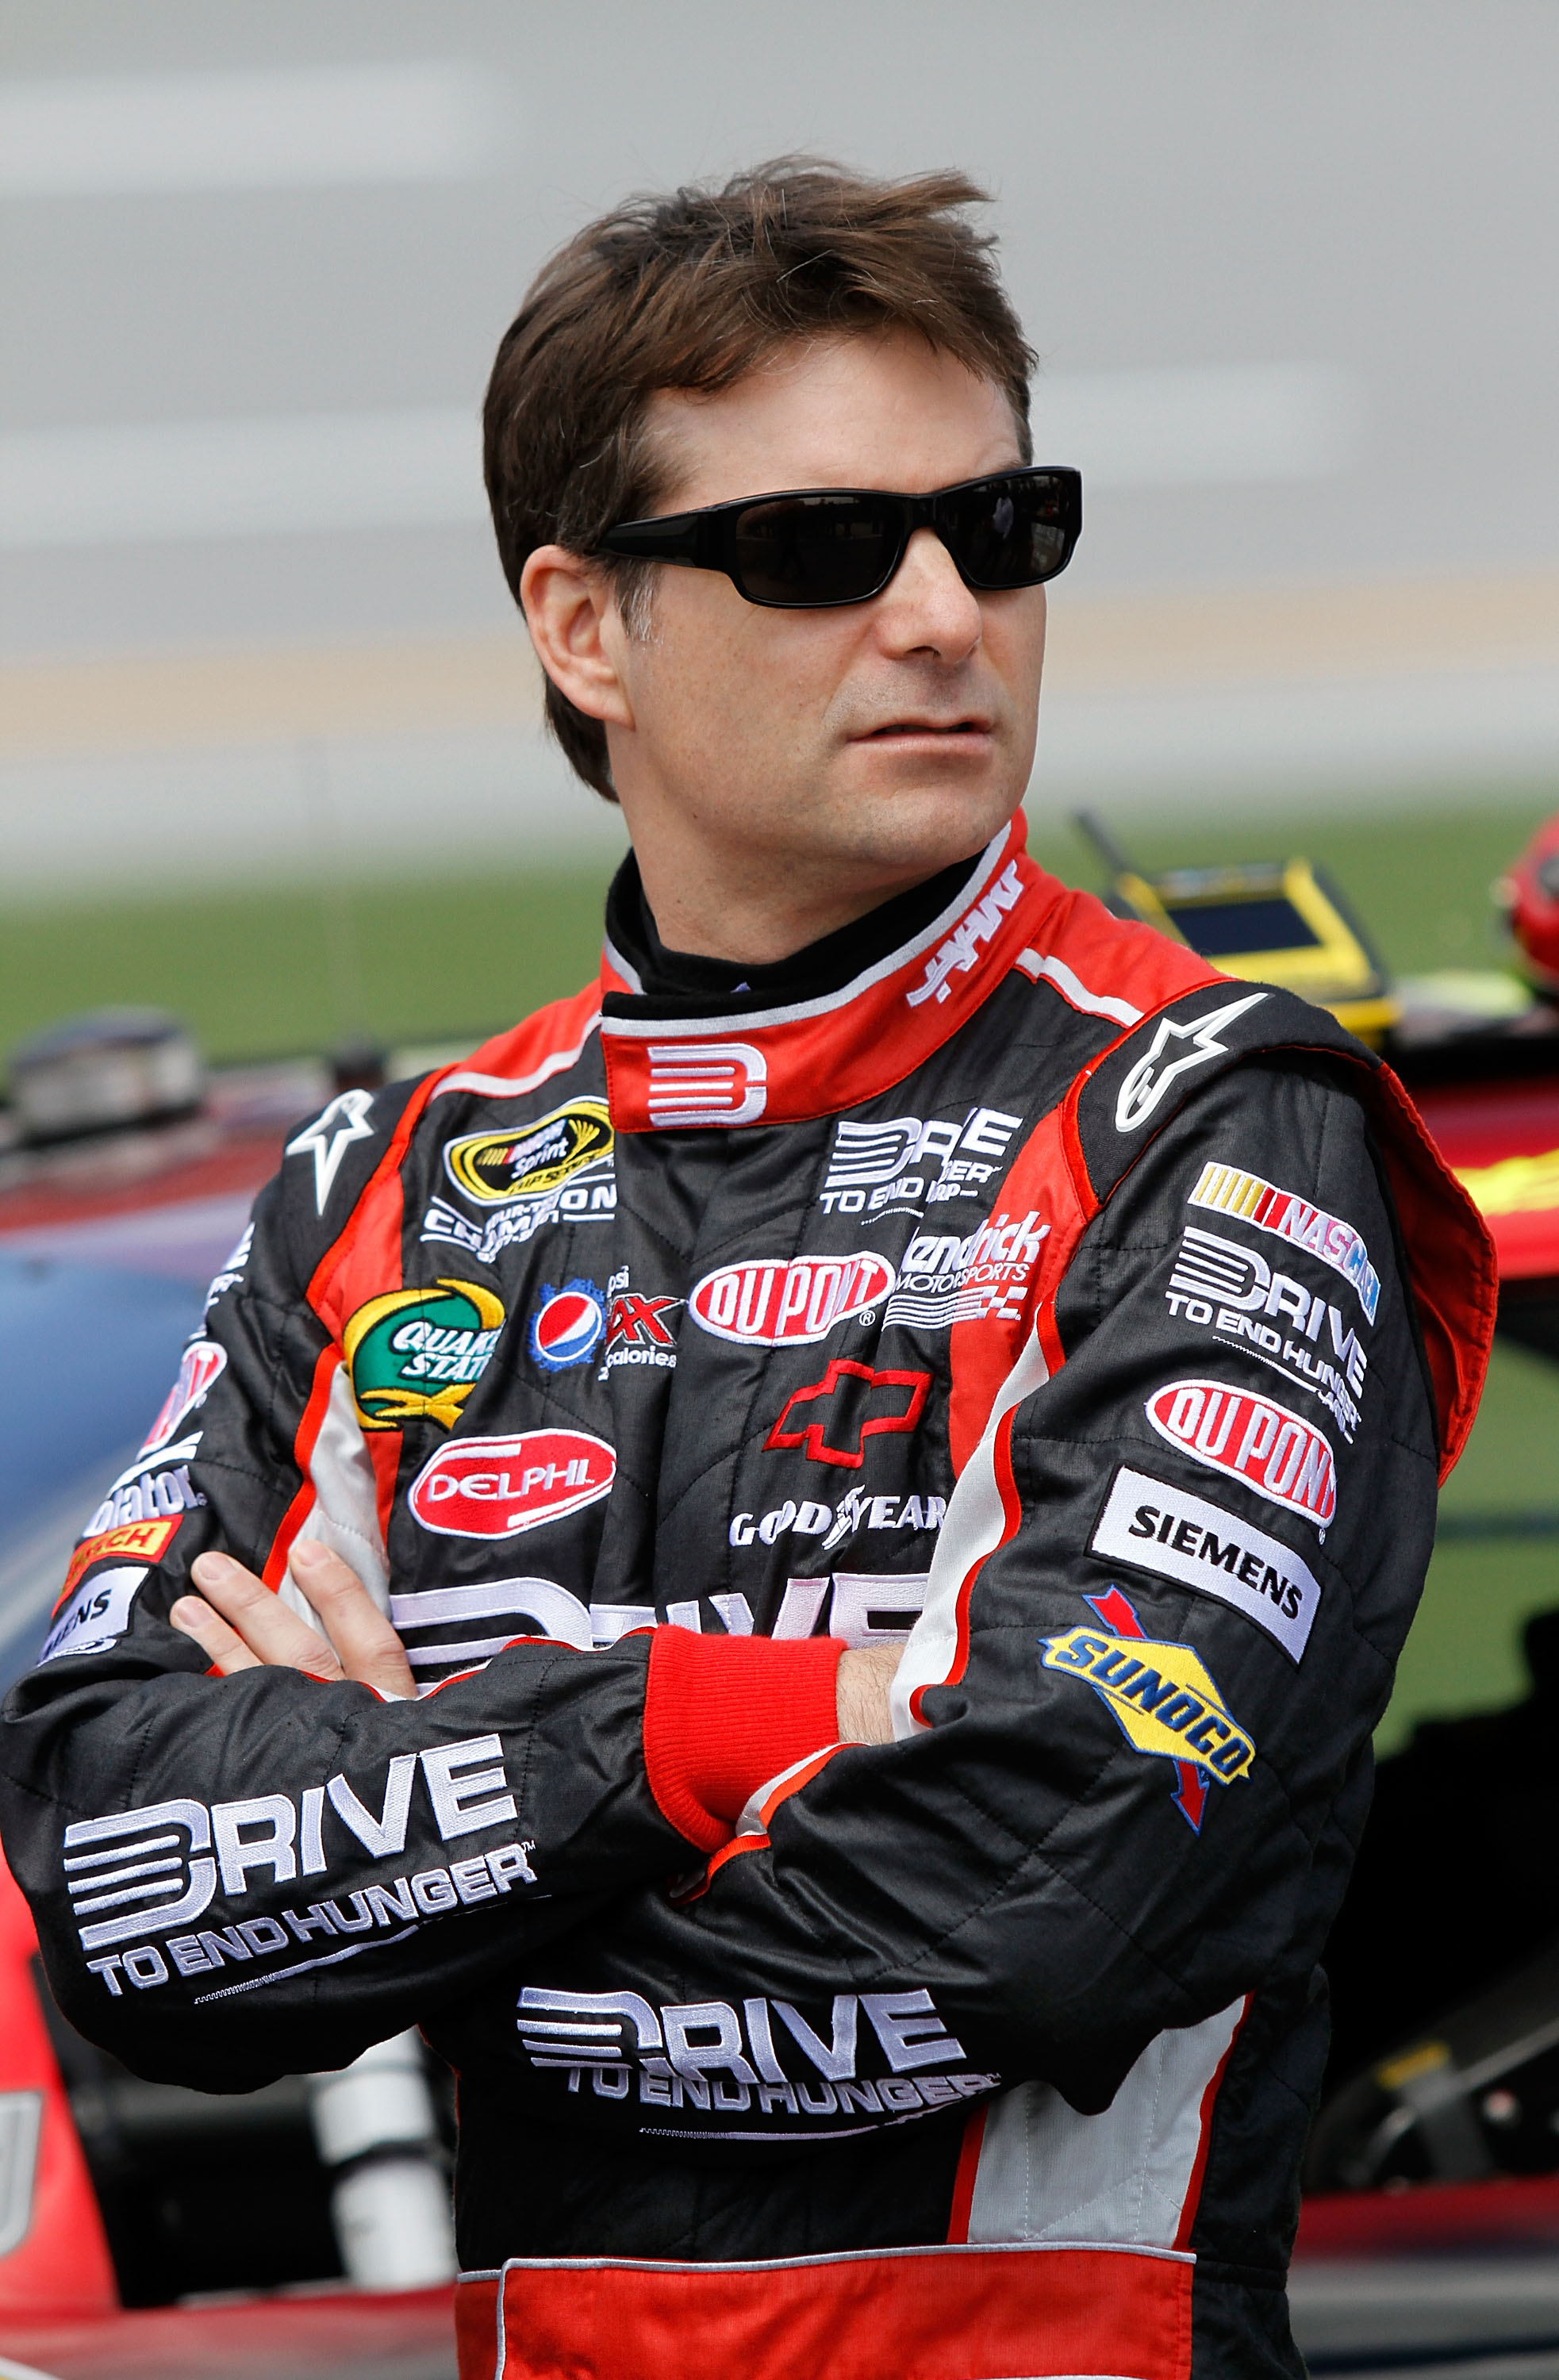 TALLADEGA, AL - APRIL 16:  Jeff Gordon, driver of the #24 Drive to End Hunger/AARP Chevrolet, stands on the grid during qualifying for the NASCAR Sprint Cup Series Aaron's 499 at Talladega Superspeedway on April 16, 2011 in Talladega, Alabama.  (Photo by